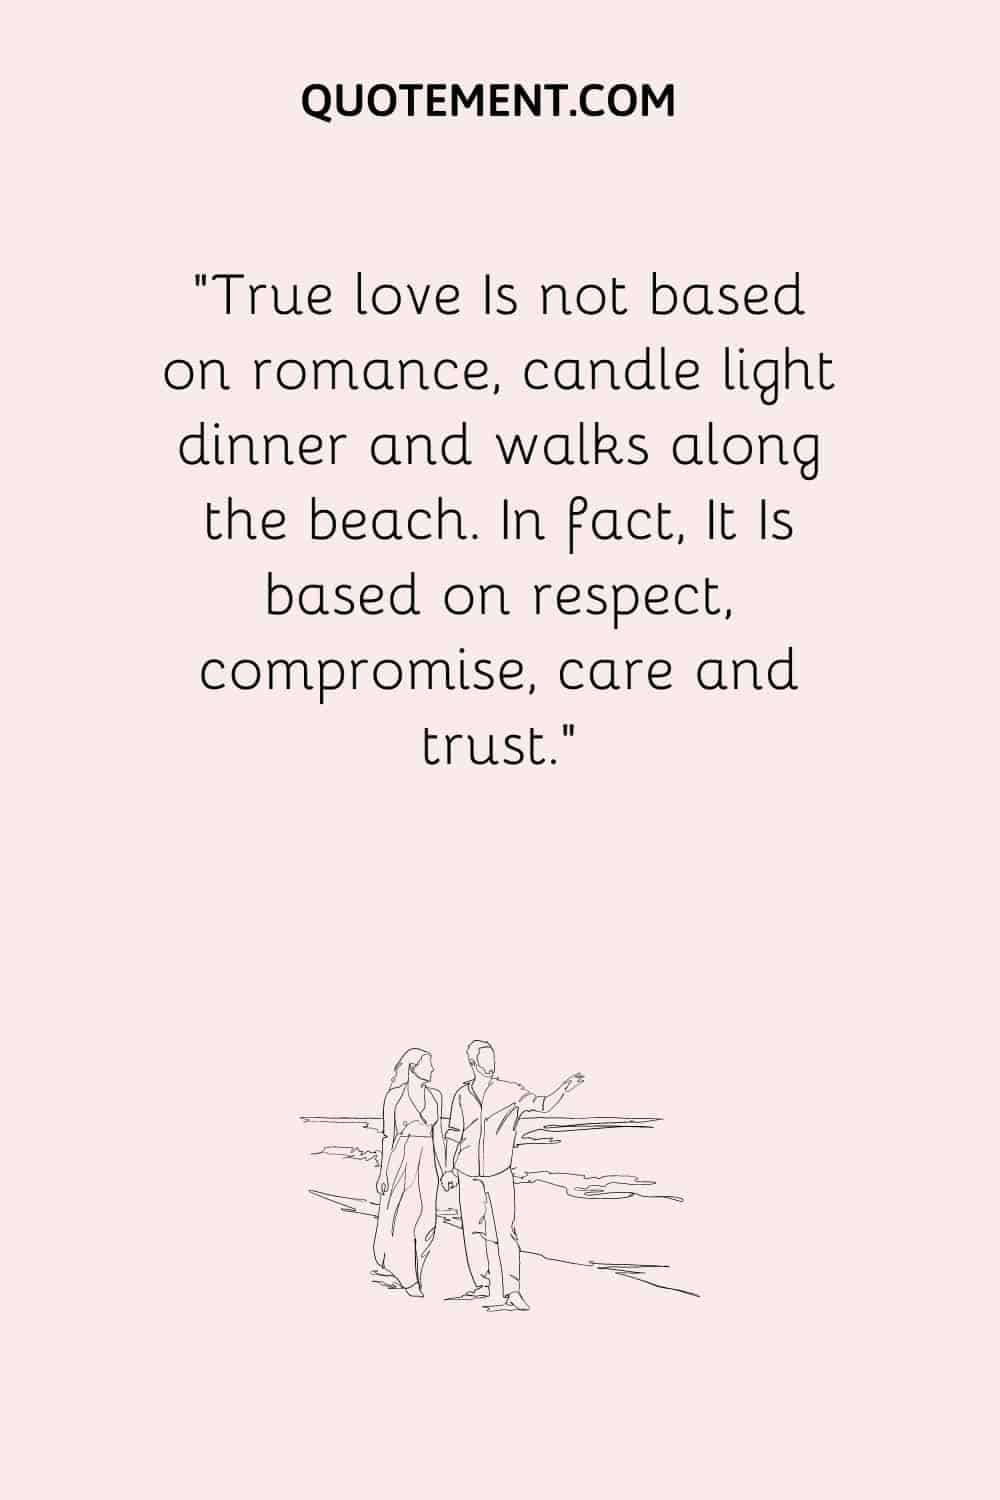 True love Is not based on romance, candle light dinner and walks along the beach